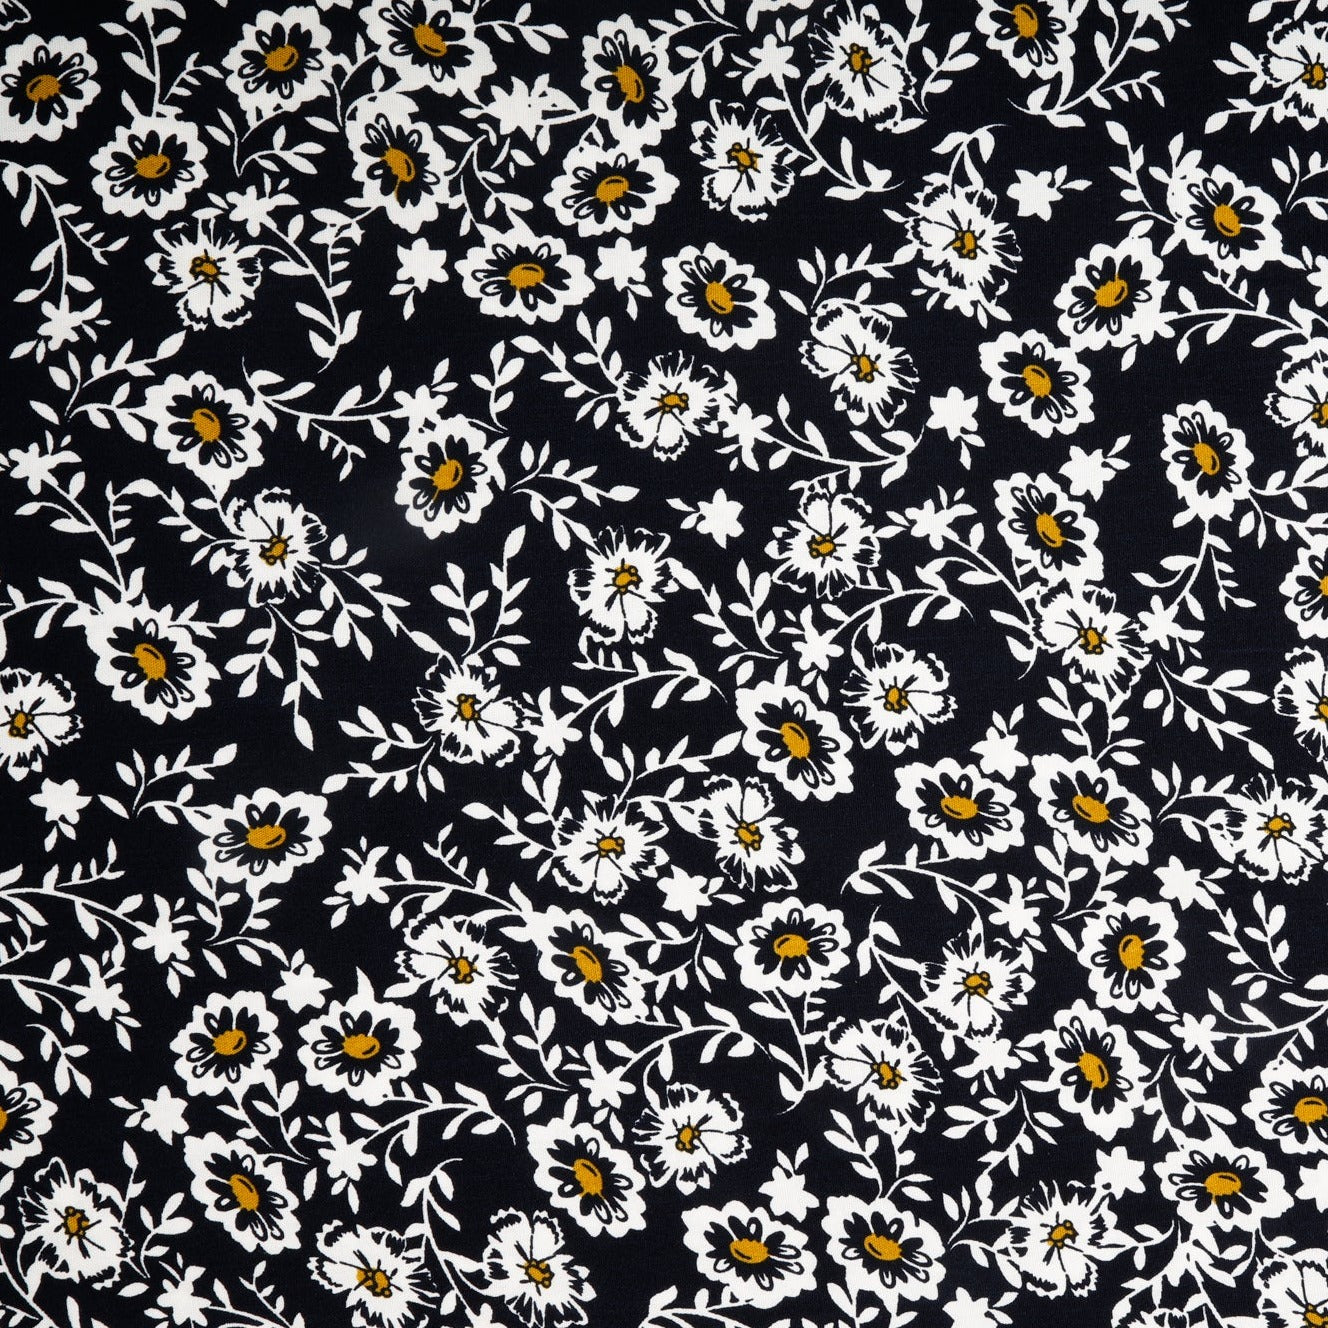 Black and Yellow Ditsy Floral Print Rayon Fabric online india